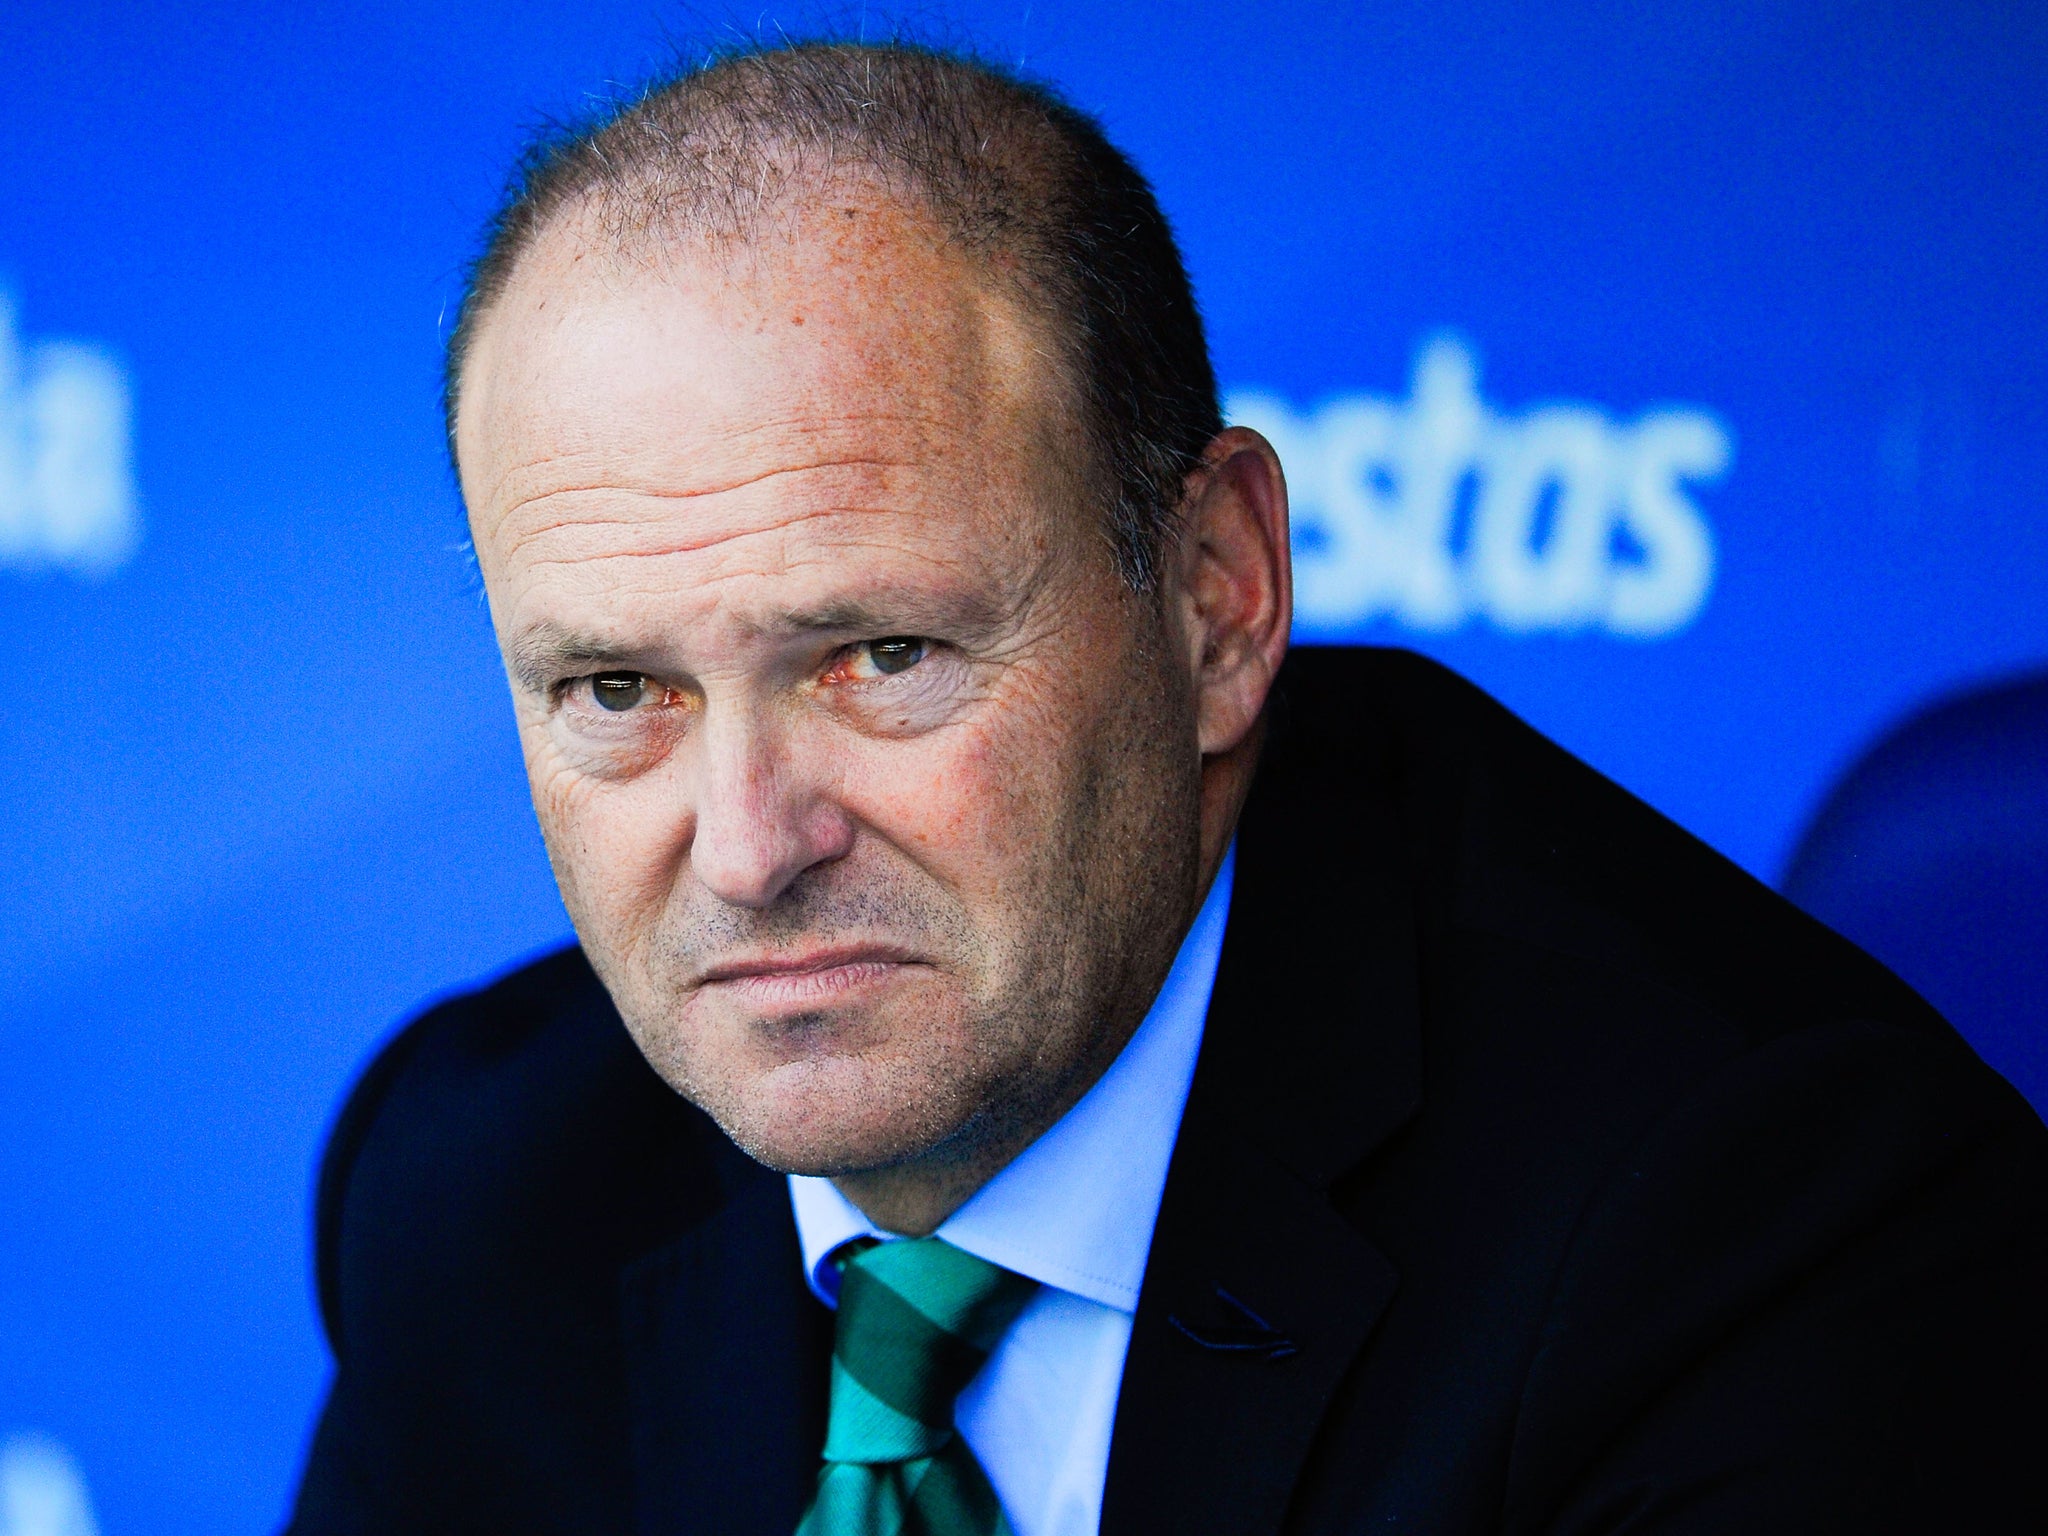 Pepe Mel is the current favourite to be the next manager of West Brom after Steve Clarke was sacked